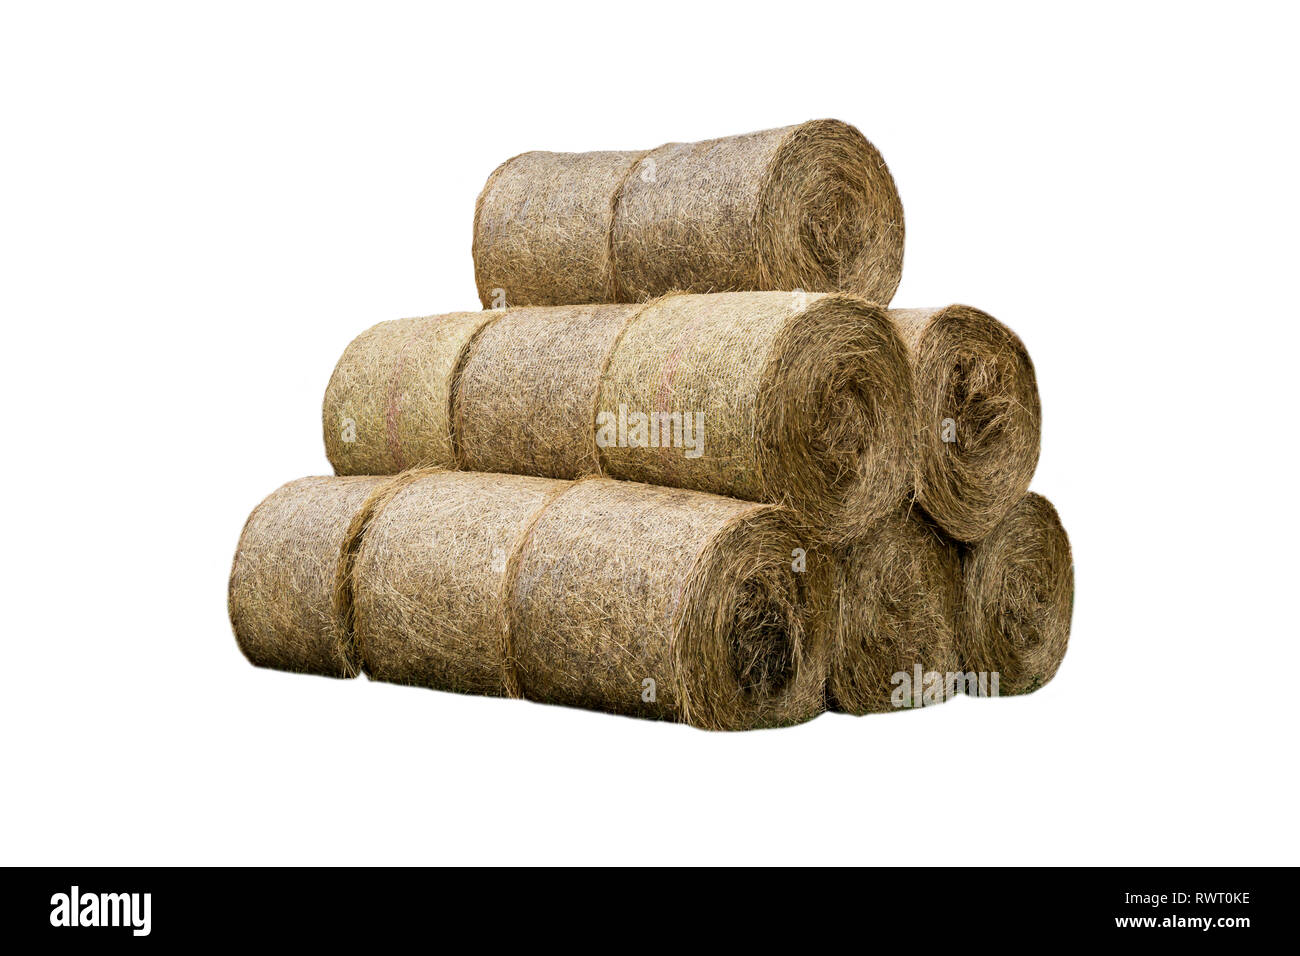 Stacked like a pyramid, bales of straw, tightened mesh . Feed and bedding for livestock on a dairy farm. General view.  Isolated photo . Stock Photo